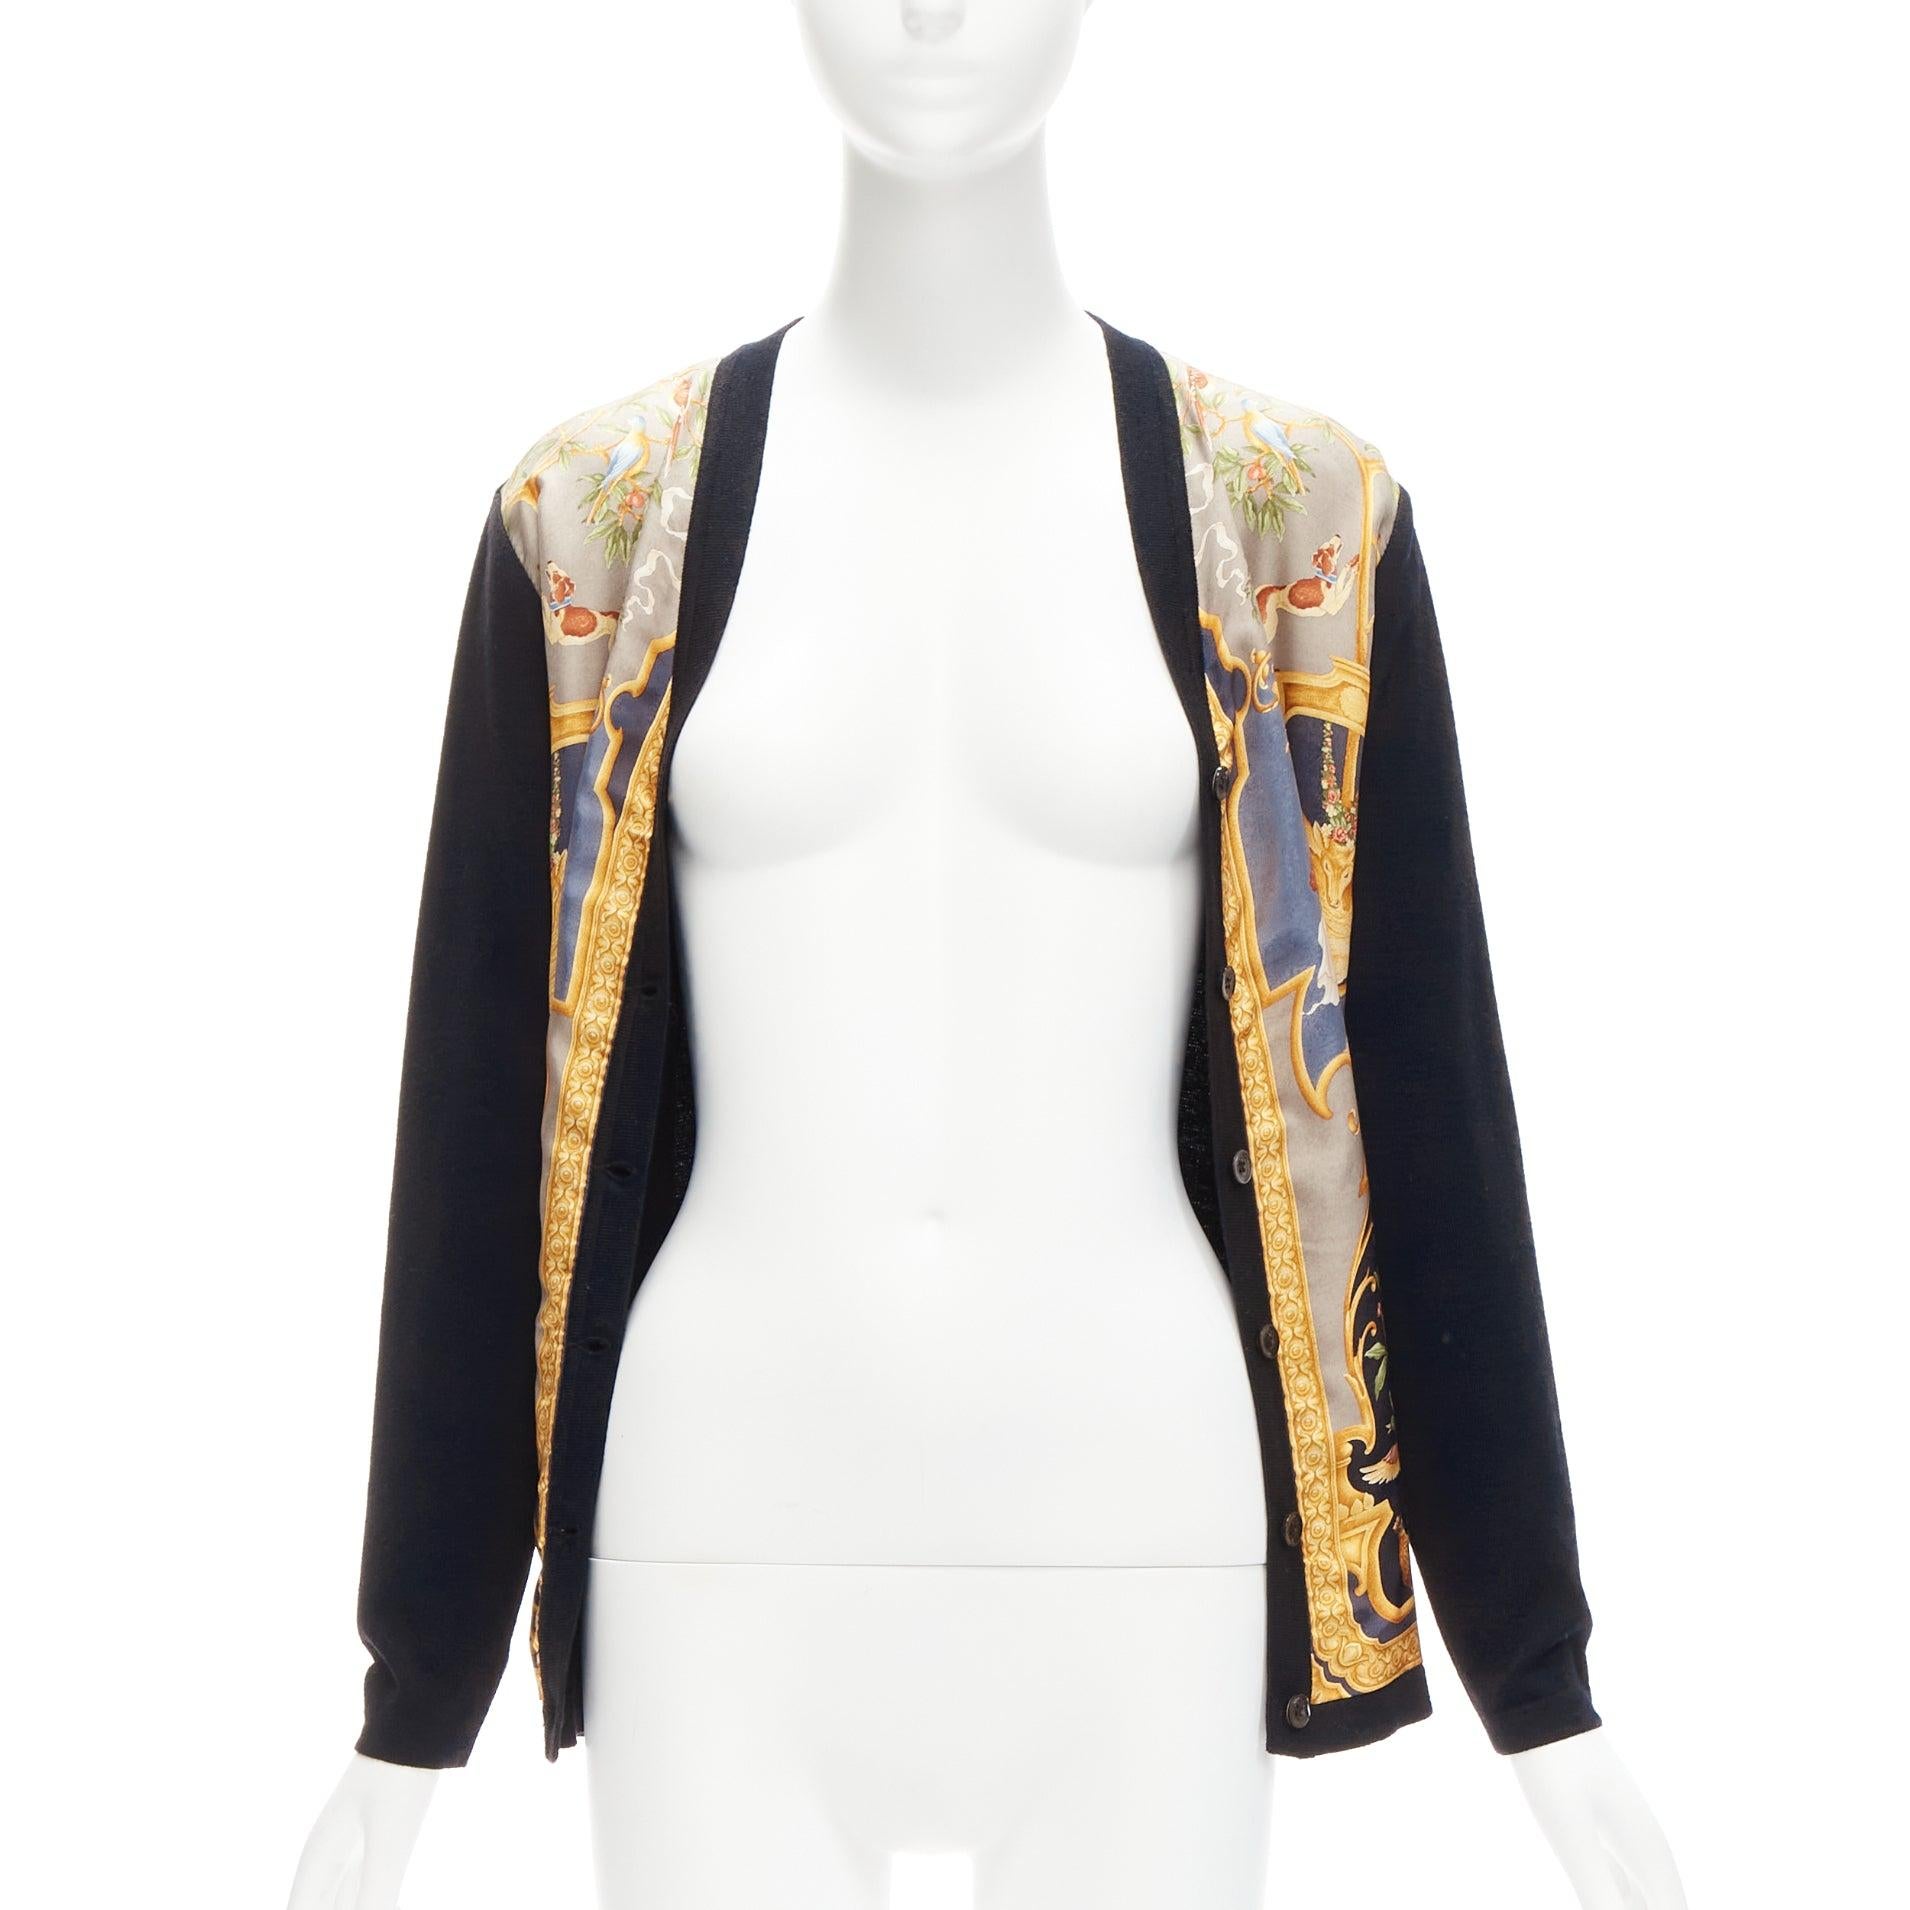 rare GUCCI Tom Ford 1995 gold Roman baroque silk black wool cardigan L
Reference: TGAS/D00924
Brand: Gucci
Designer: Tom Ford
Collection: 1995
Material: Wool, Silk
Color: Gold, Black
Pattern: Barocco
Closure: Button
Made in: